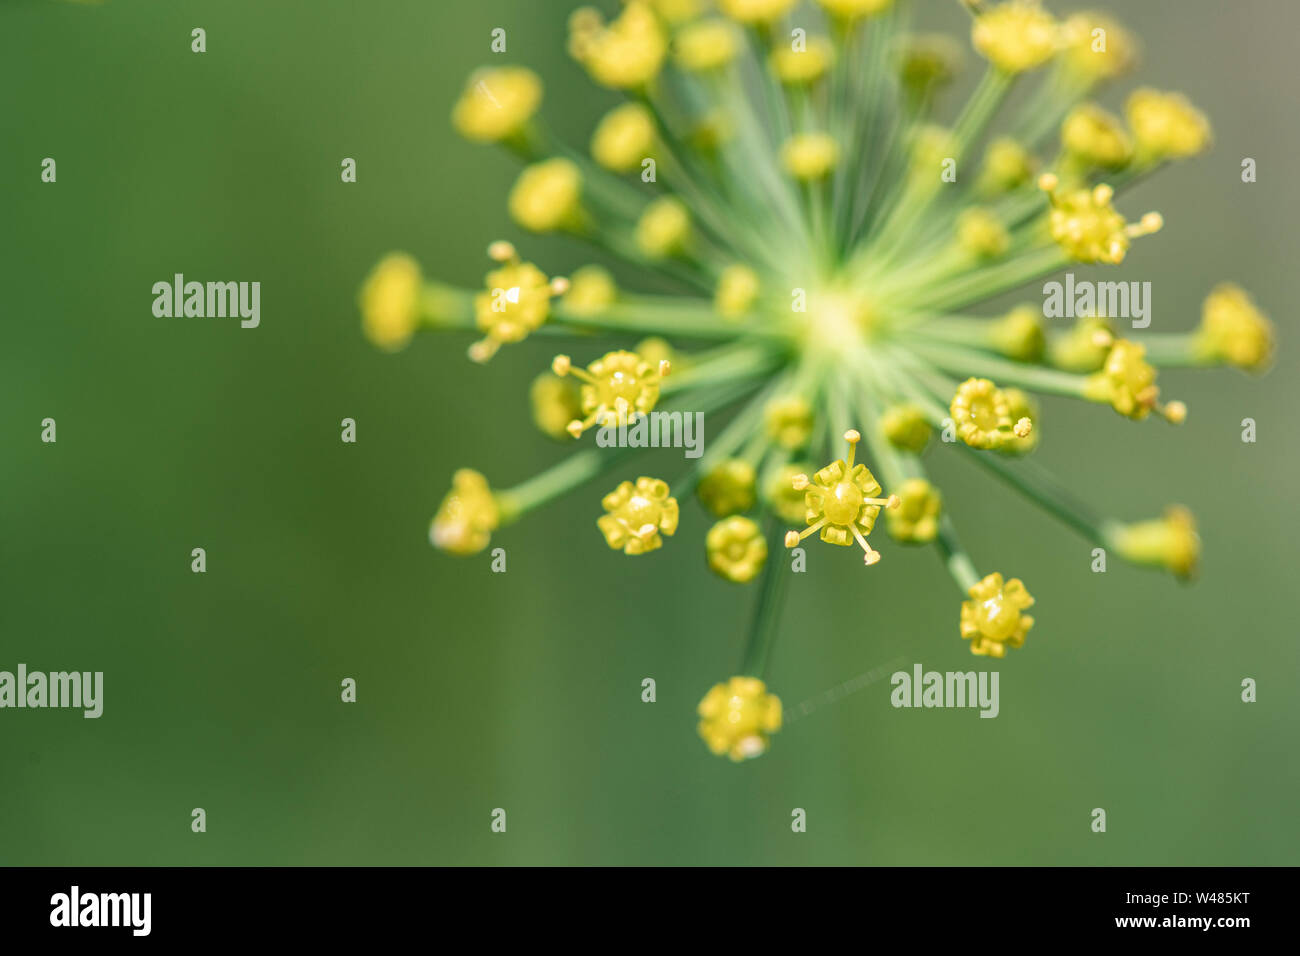 Dill flower umbels in bloom. Stock Photo